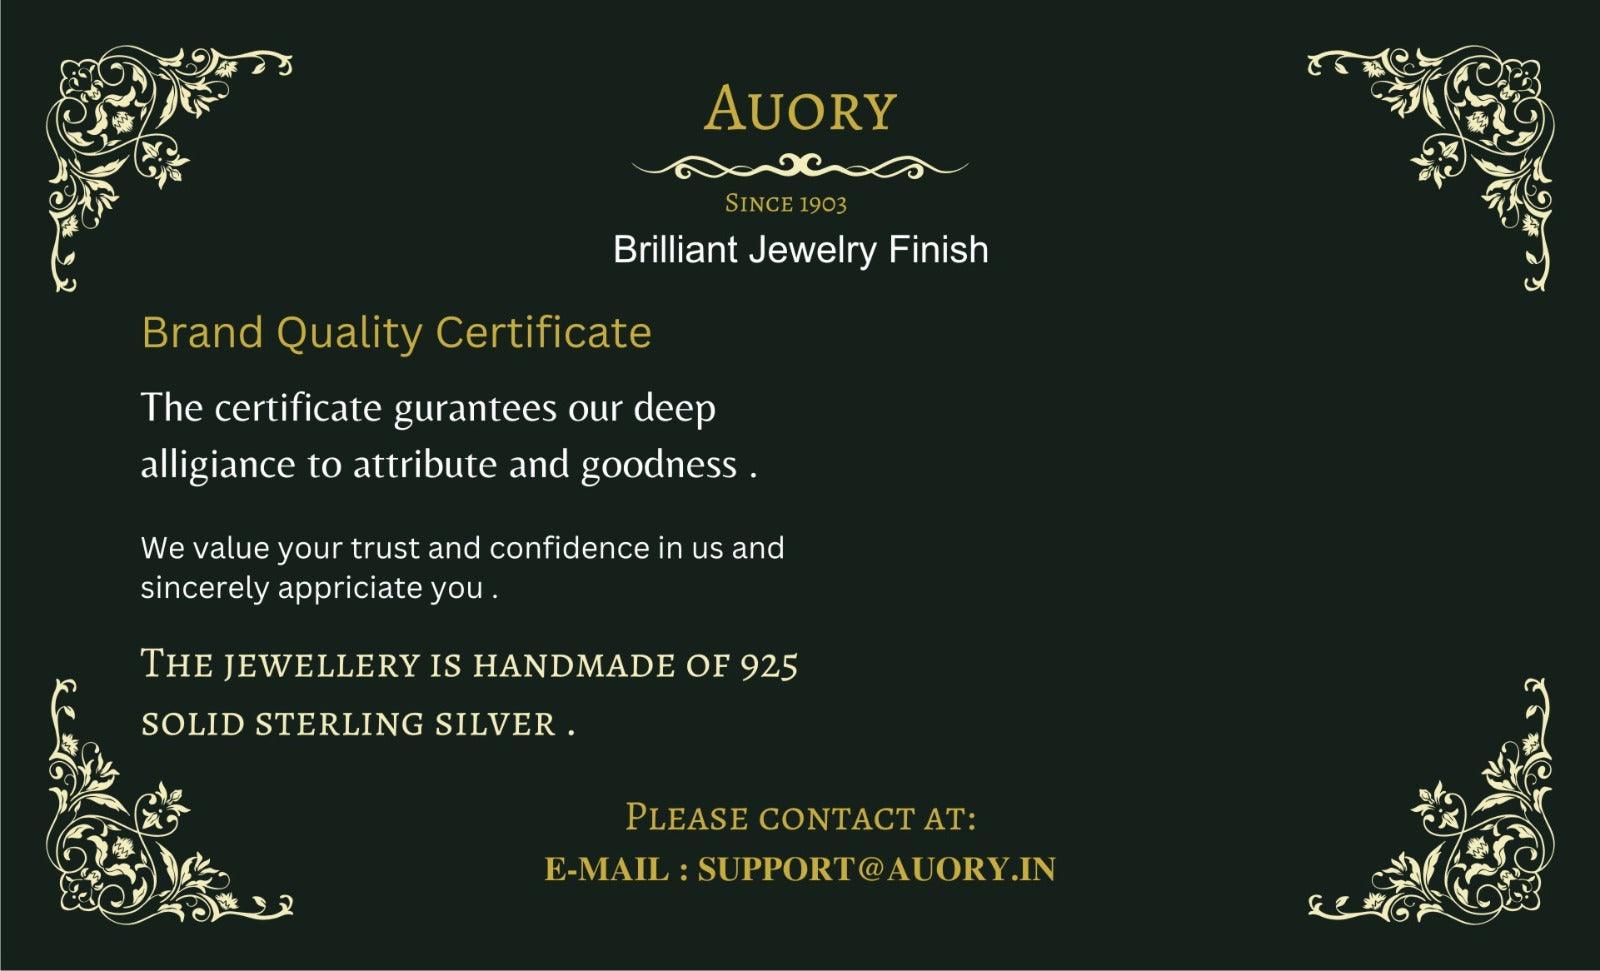 "Authenticity Assured: Obtain a Certificate of Authenticity for Your Jewelry with Confidence" - Auory